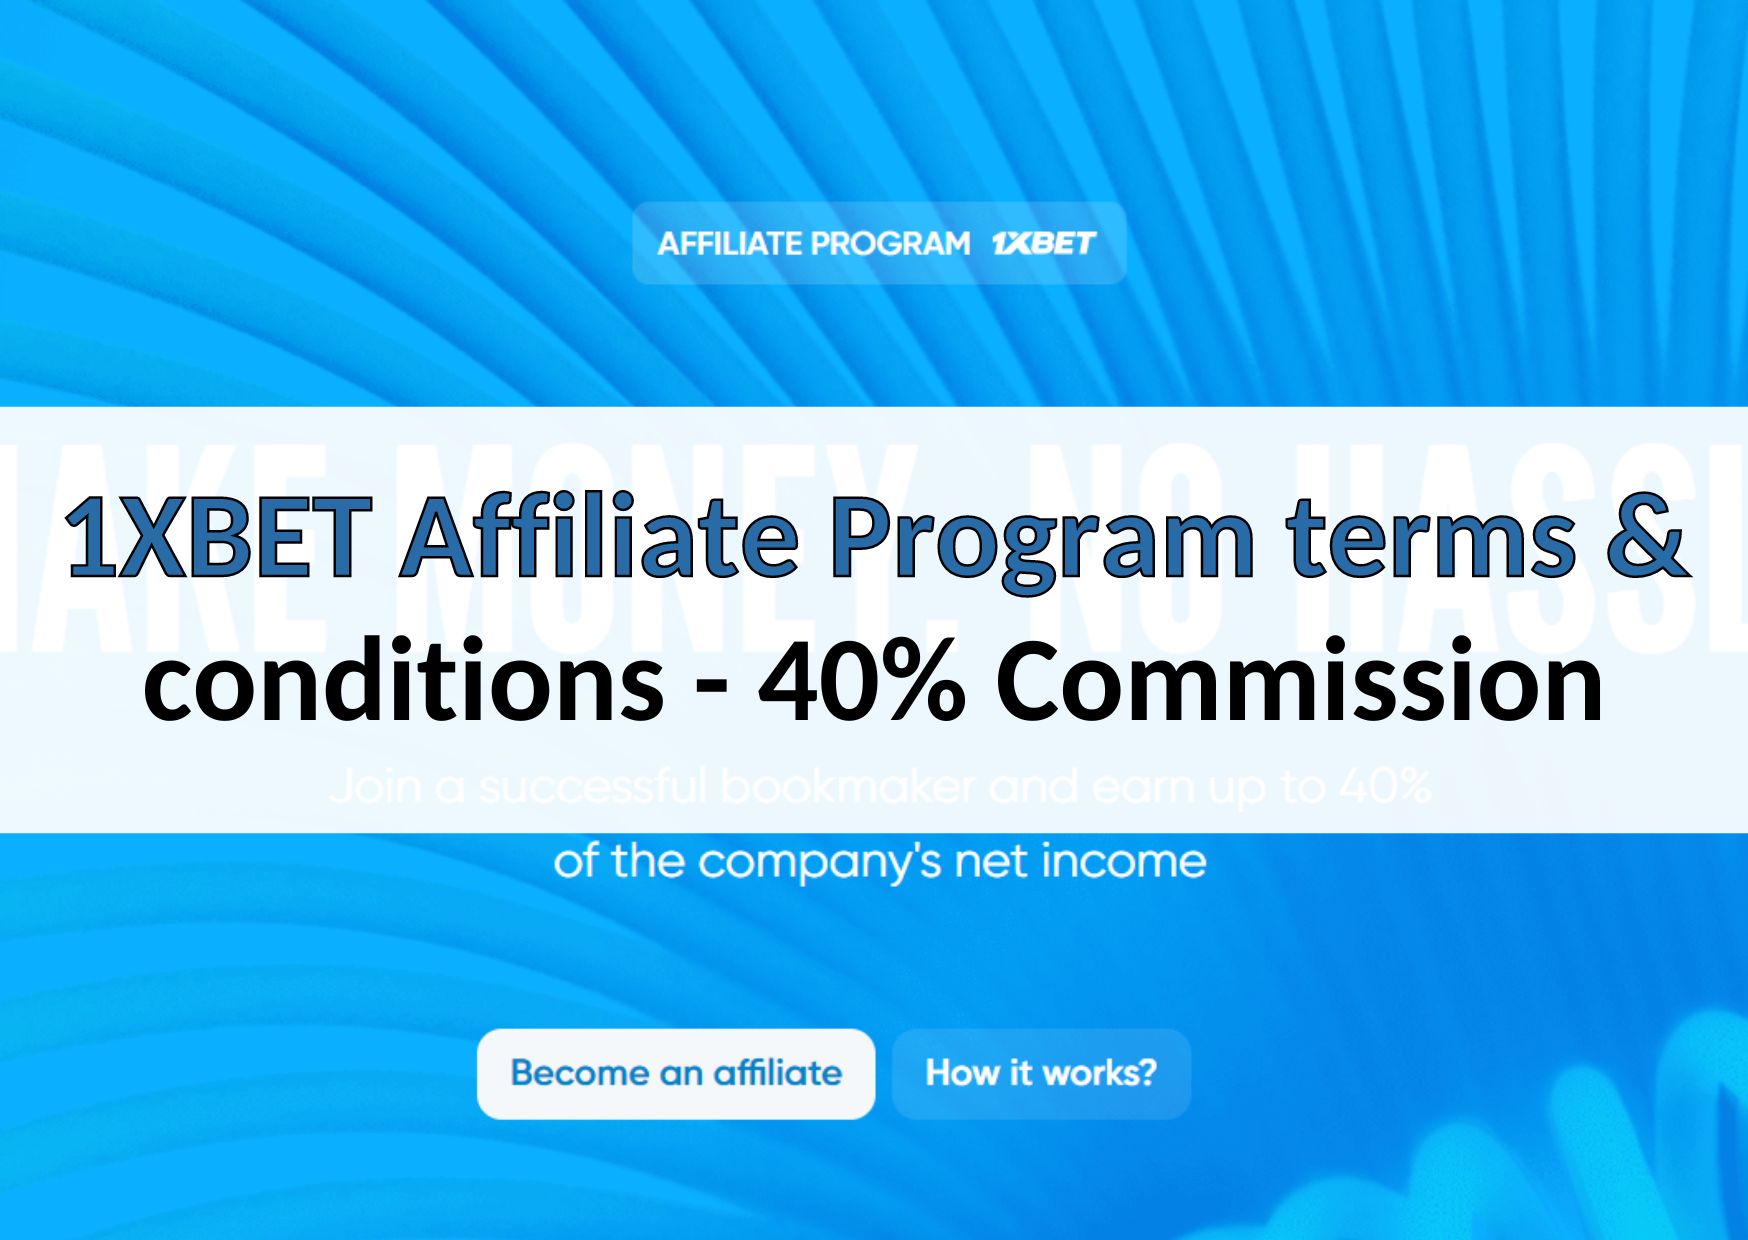 1XBET Affiliate Program terms & conditions - 40% Commission